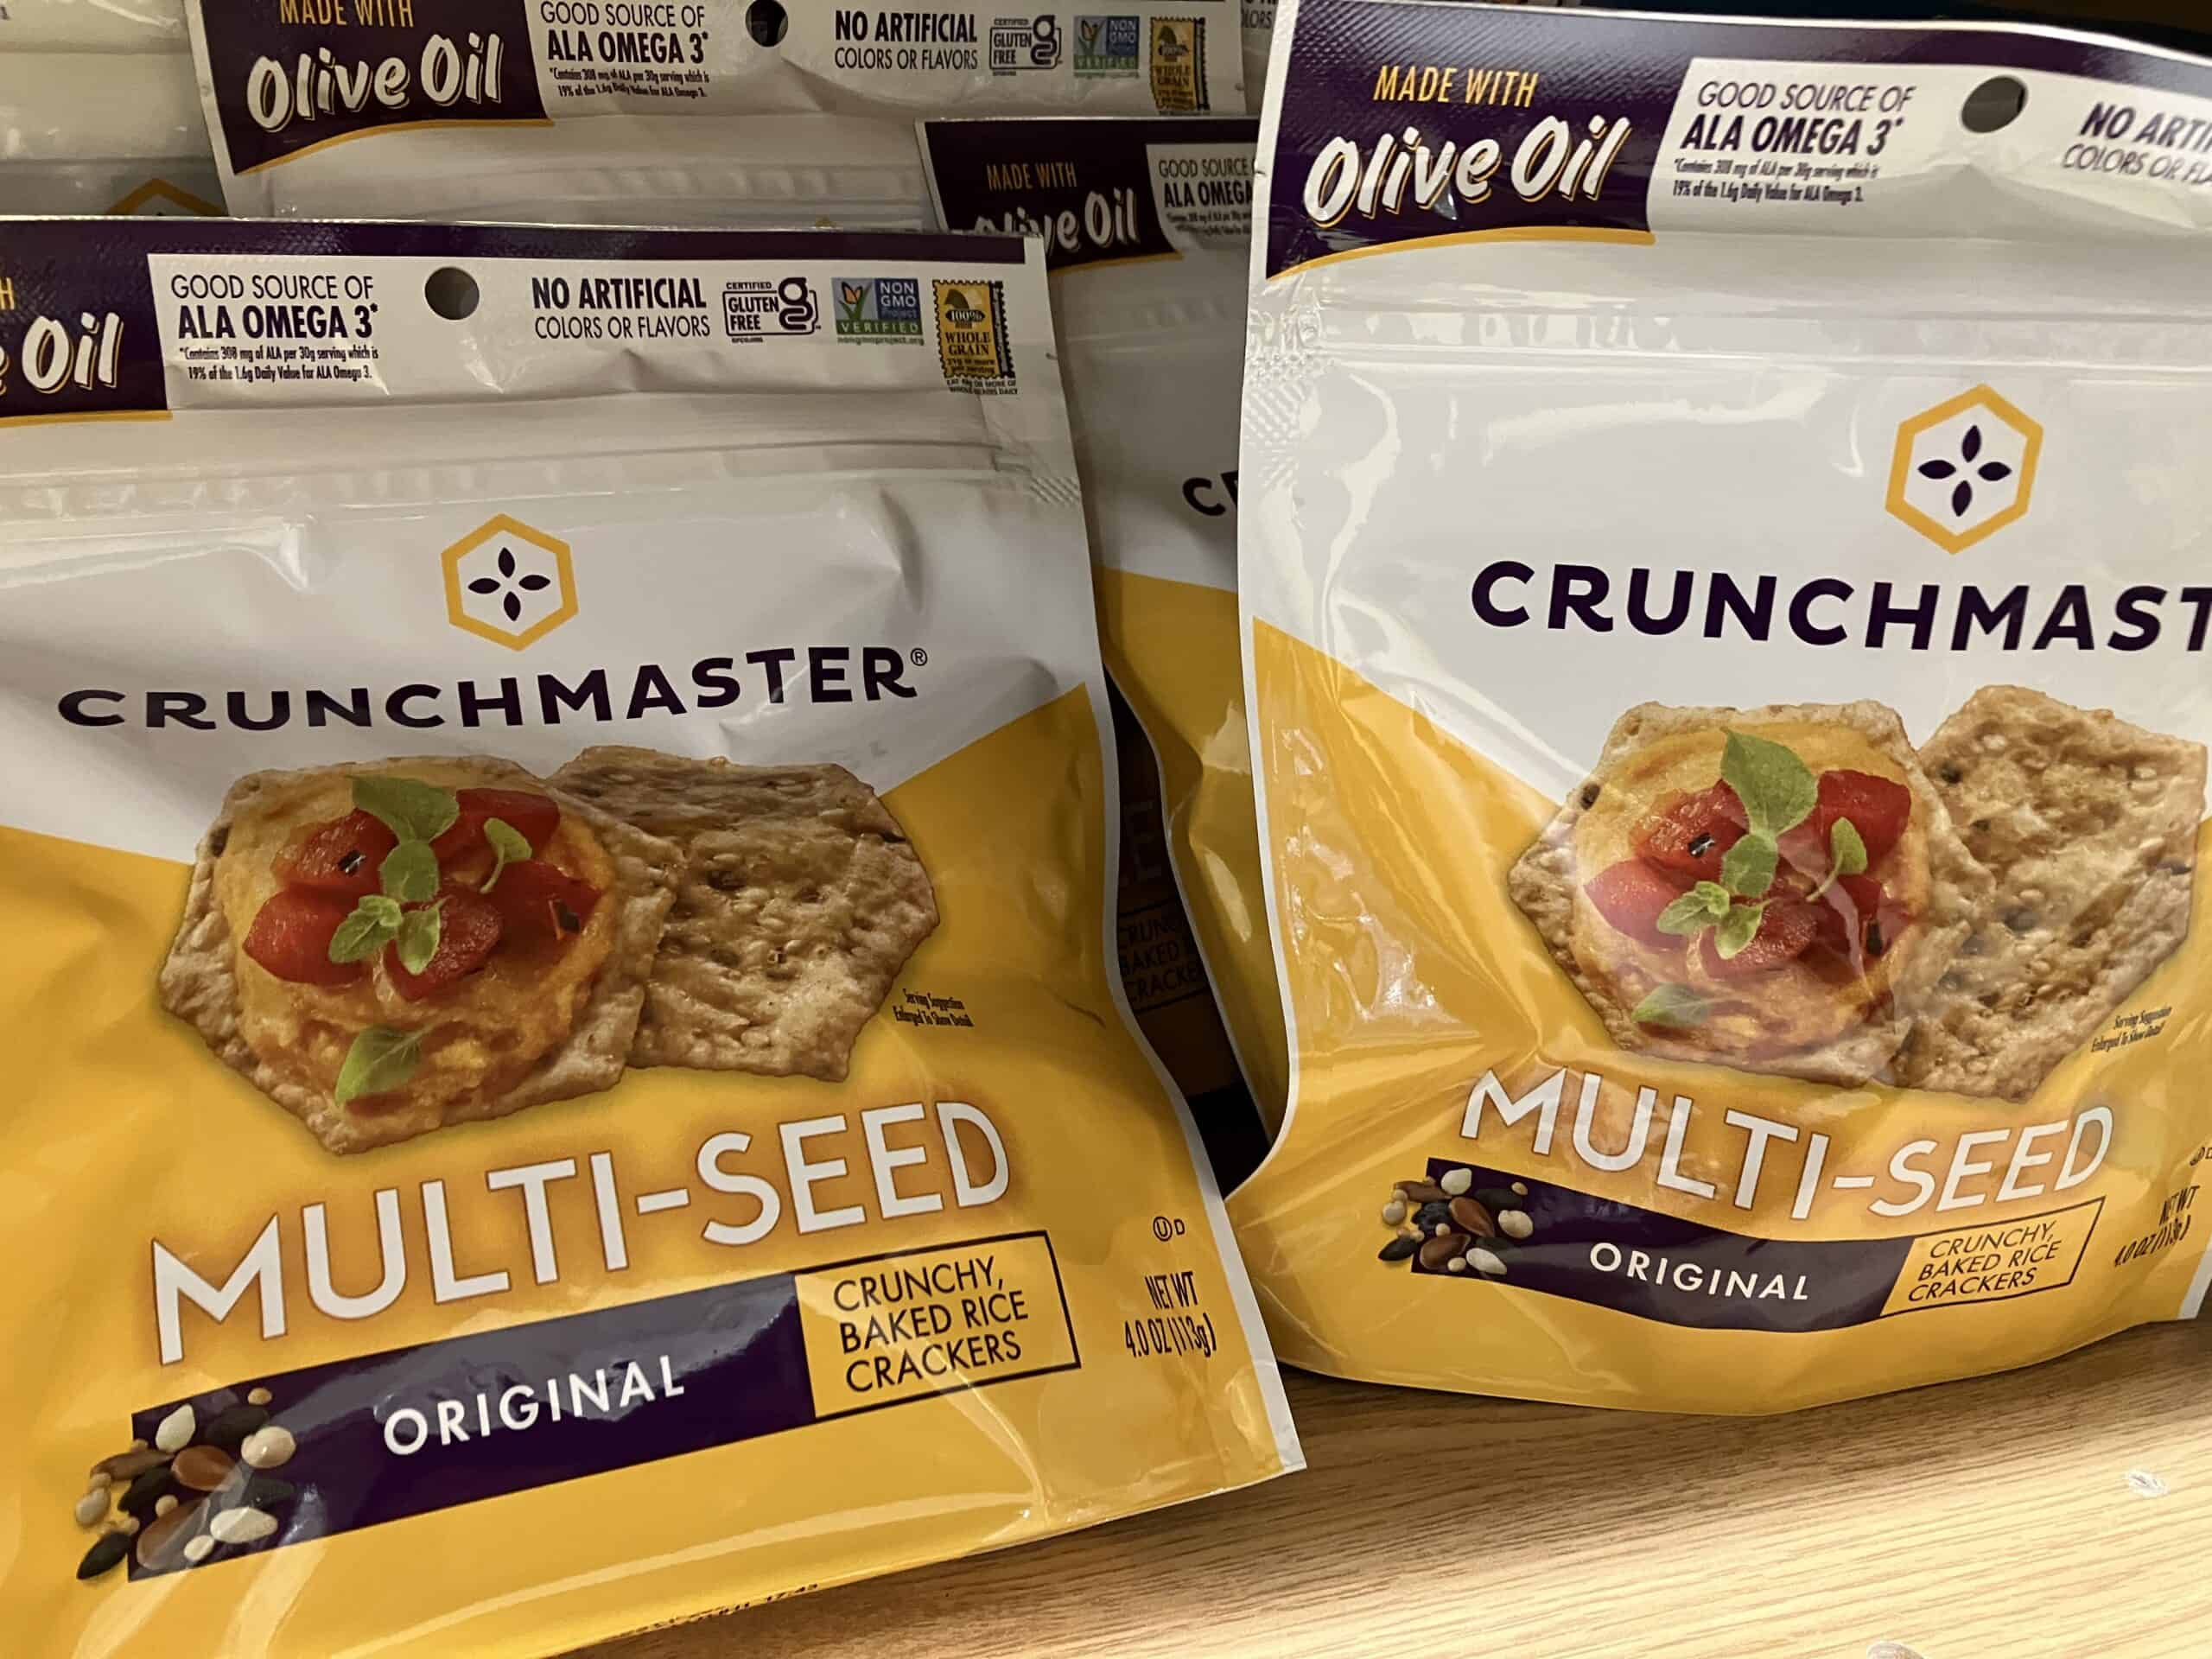 Crunchmaster multi-seed crackers